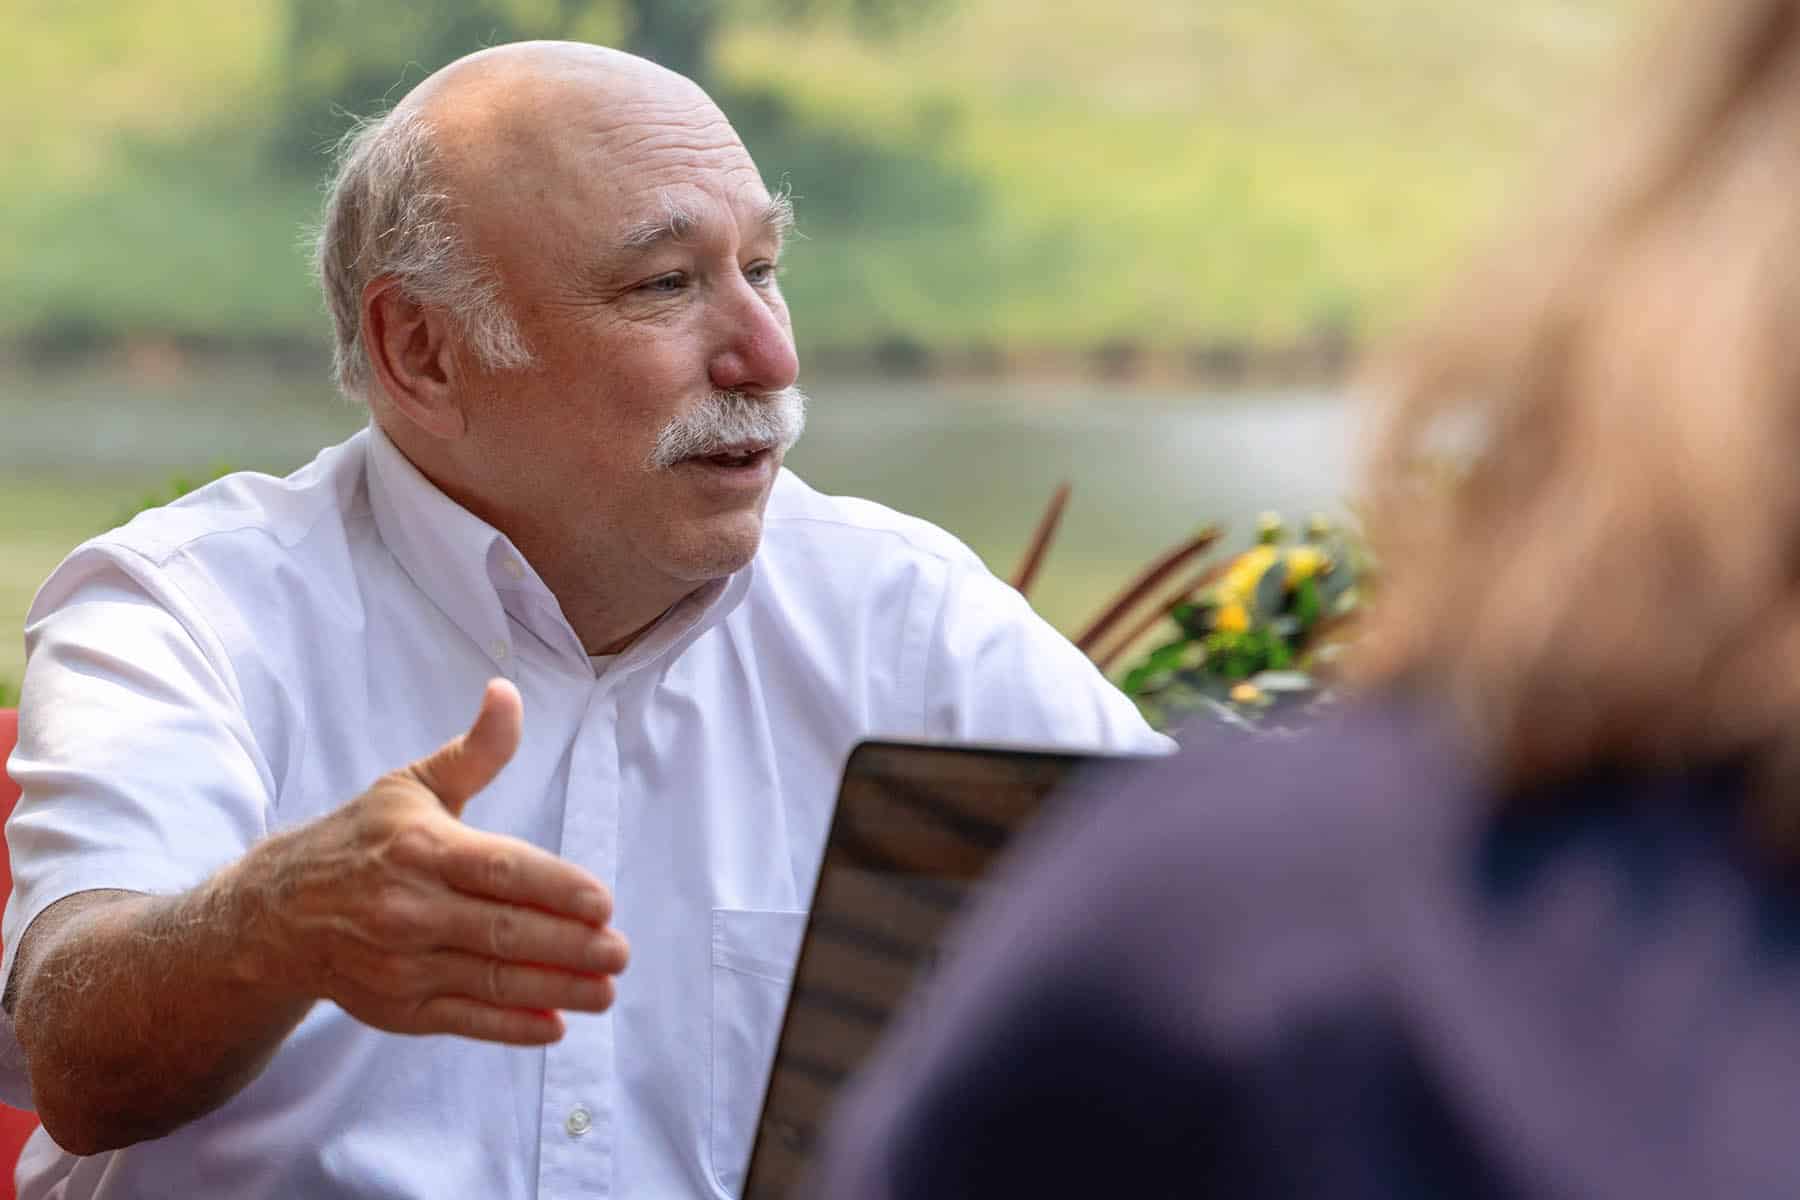 A man with white hair and a white mustache is sitting in front of a lake. He is wearing a short-sleeved white button down shirt and is speaking with a group off-camera.